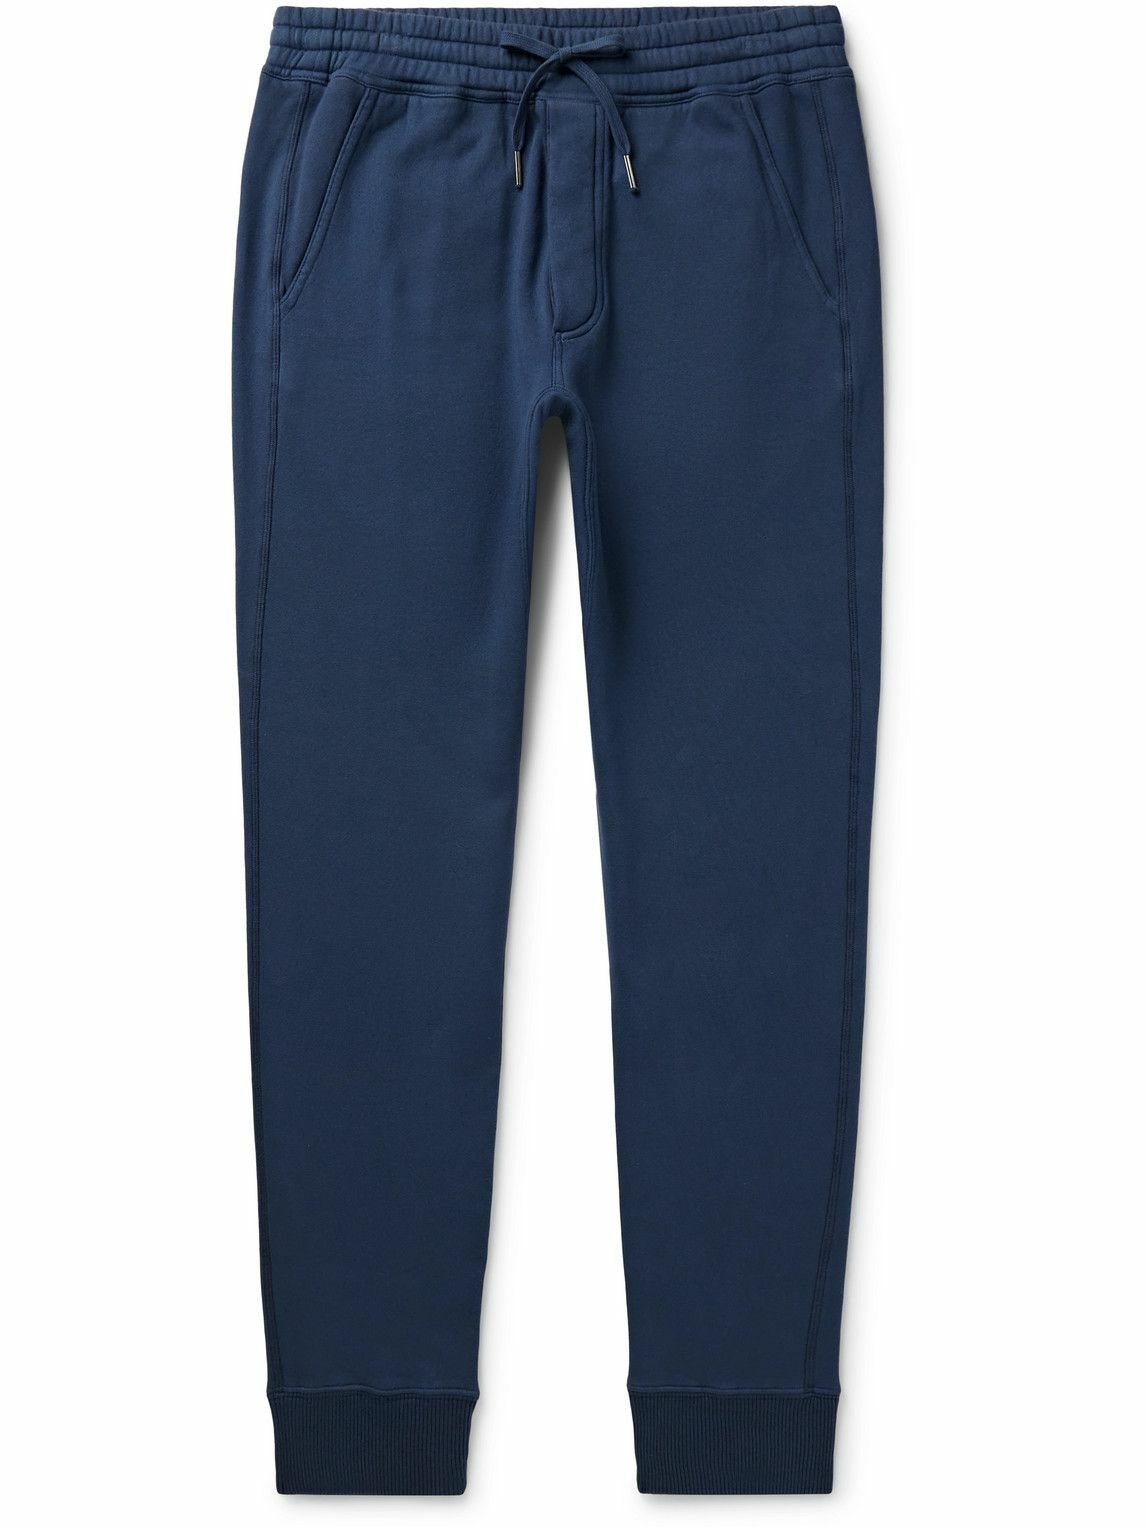 Photo: TOM FORD - Tapered Garment-Dyed Cotton-Jersey Sweatpants - Blue